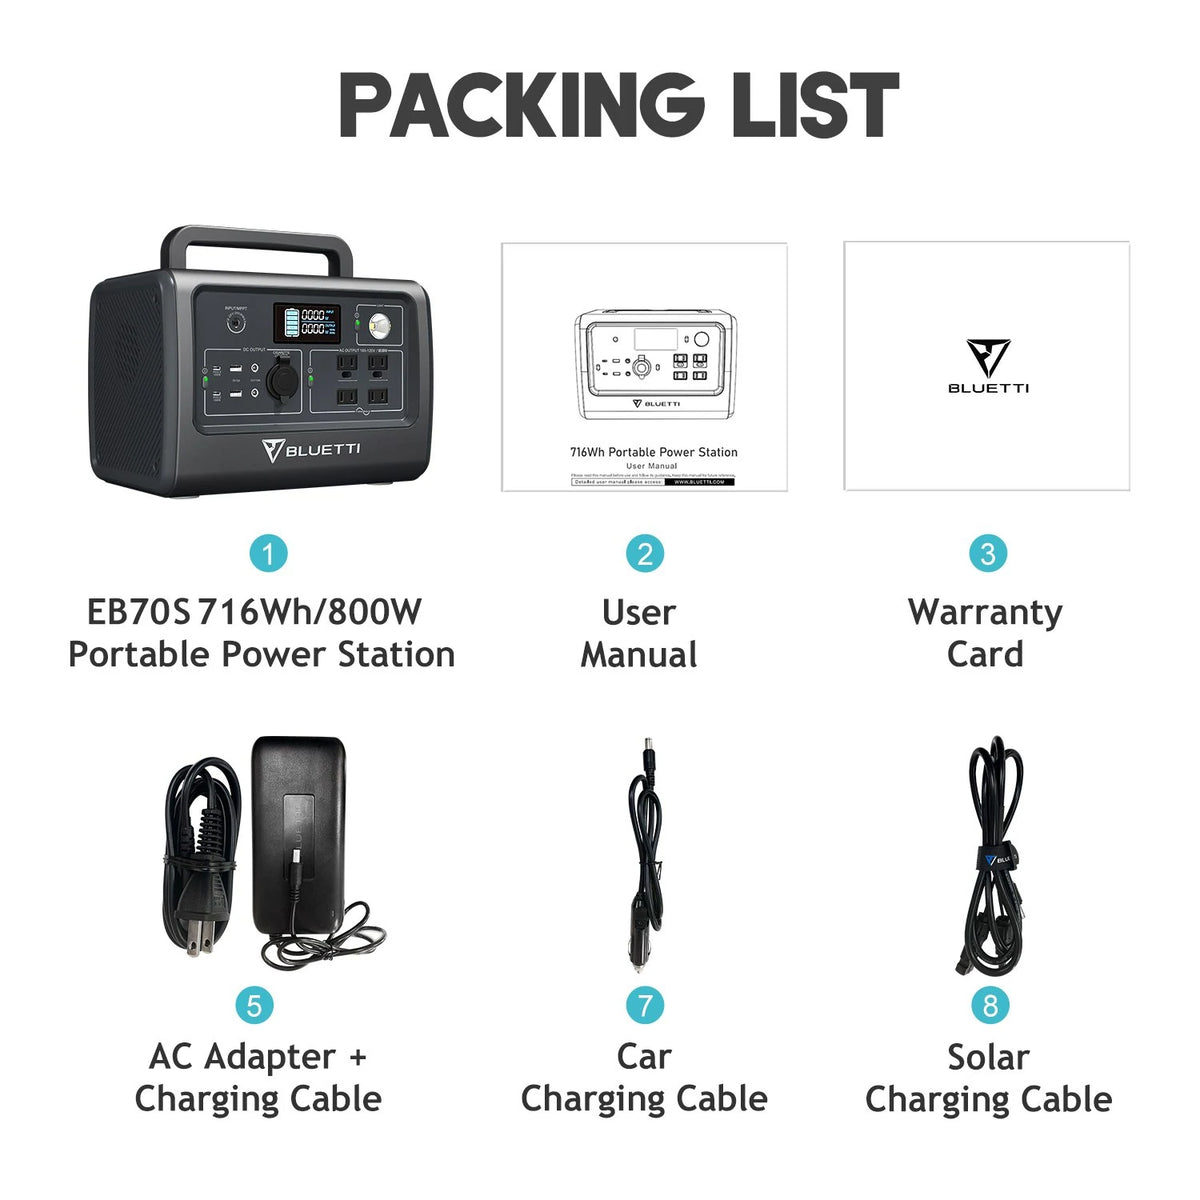 The EB70S package includes the battery itself, a user manual, a warranty card, an AC adapter+charging cable, a car charging cable and a solar charging cable.